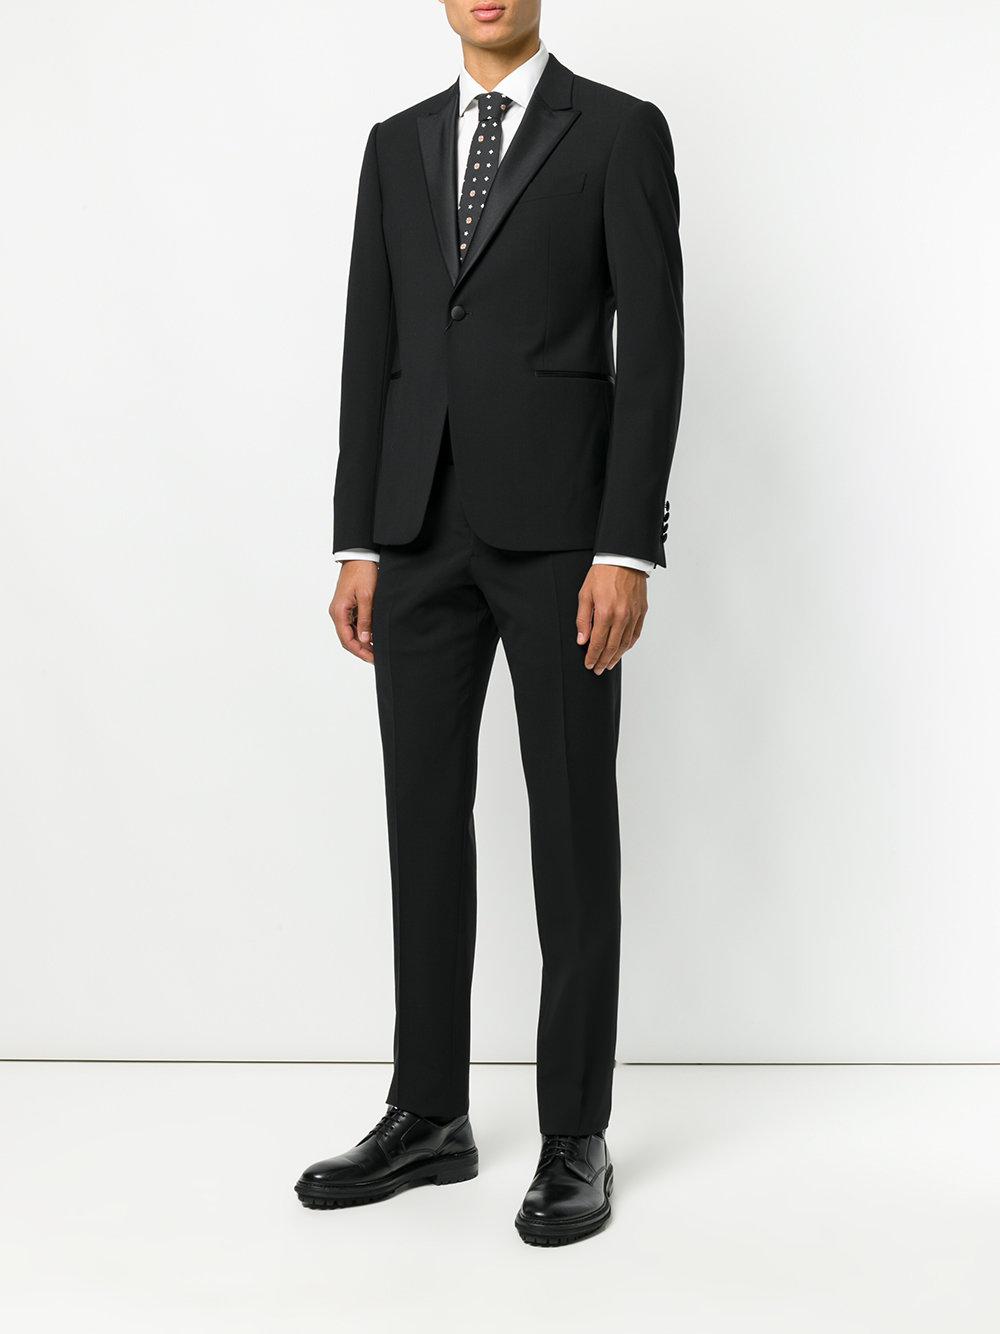 Lyst - Armani Formal Buttoned Dinner Suit in Black for Men